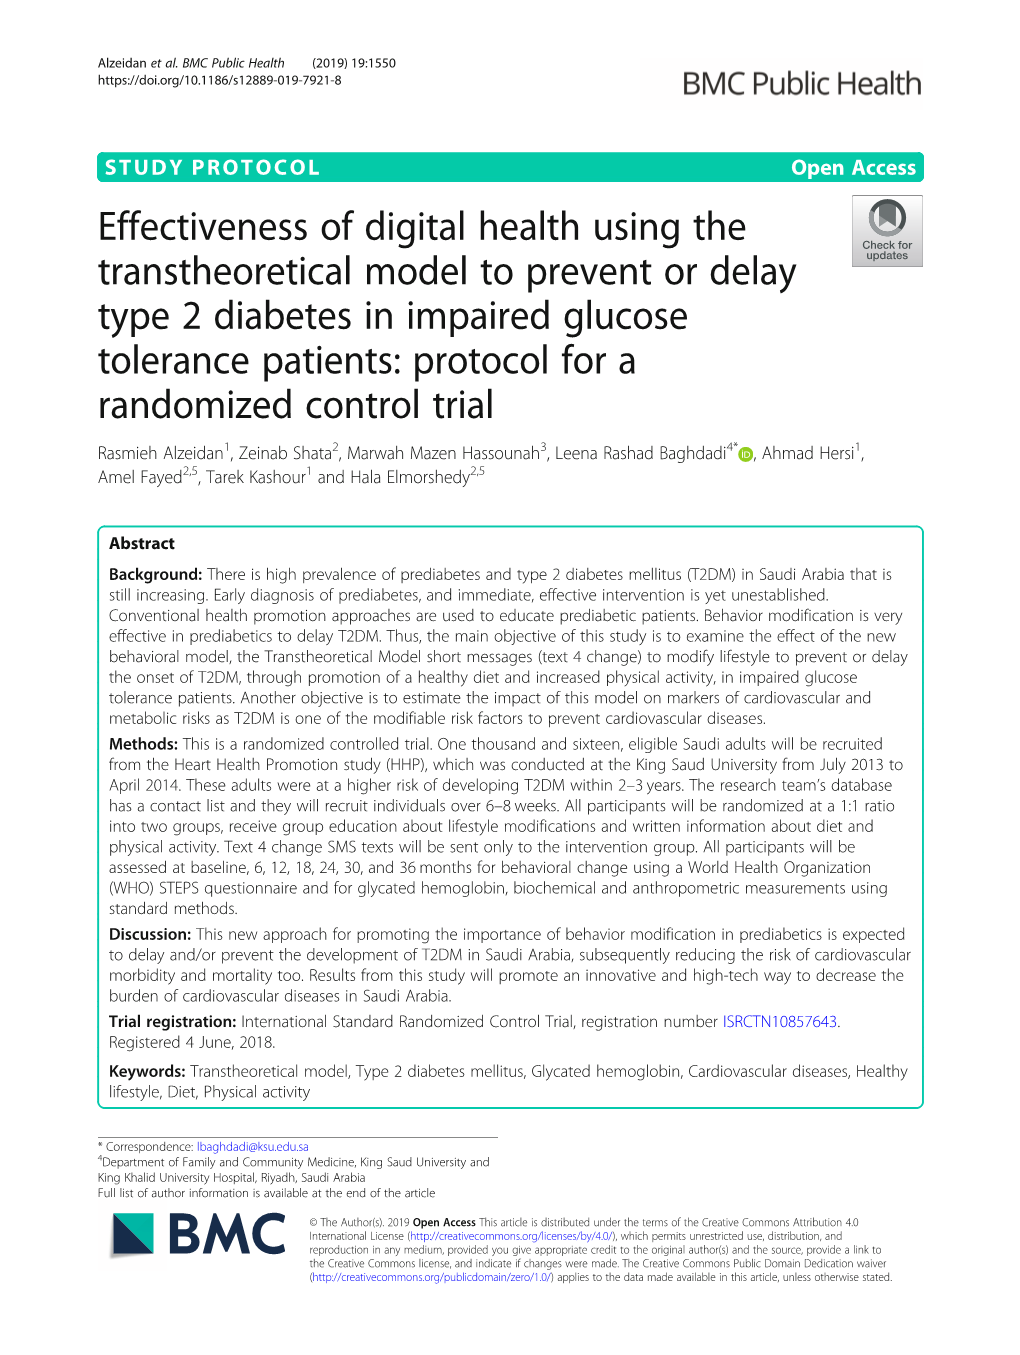 Effectiveness of Digital Health Using the Transtheoretical Model to Prevent Or Delay Type 2 Diabetes in Impaired Glucose Toleran